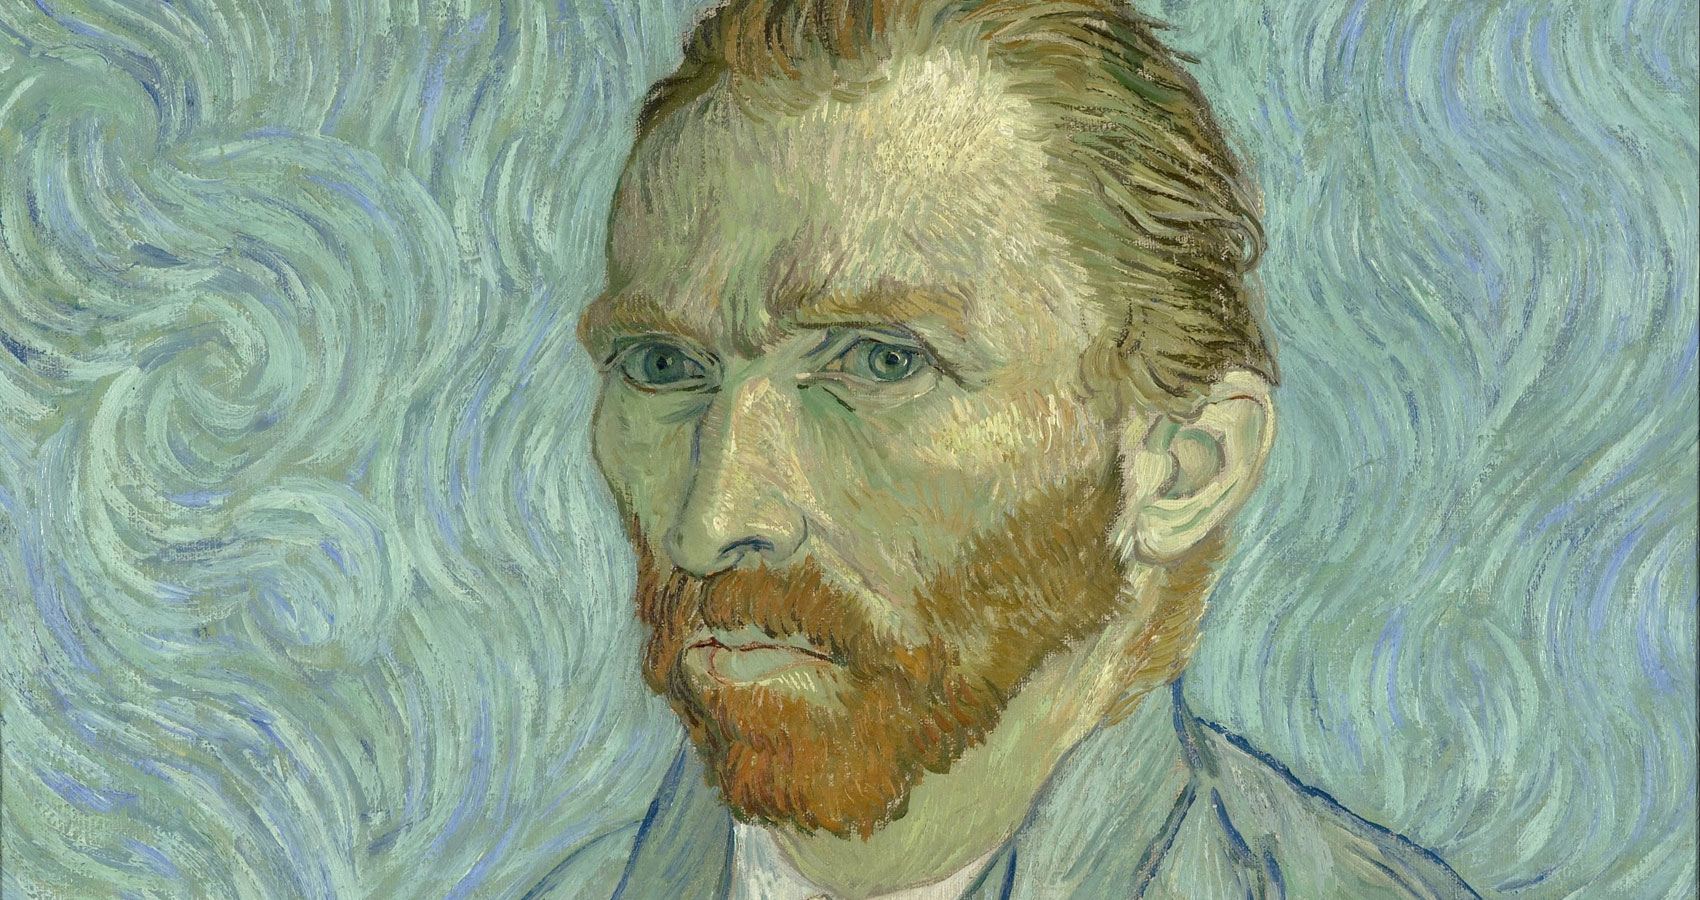 What Vincent Would Paint, written by TM Arko at Spillwords.com